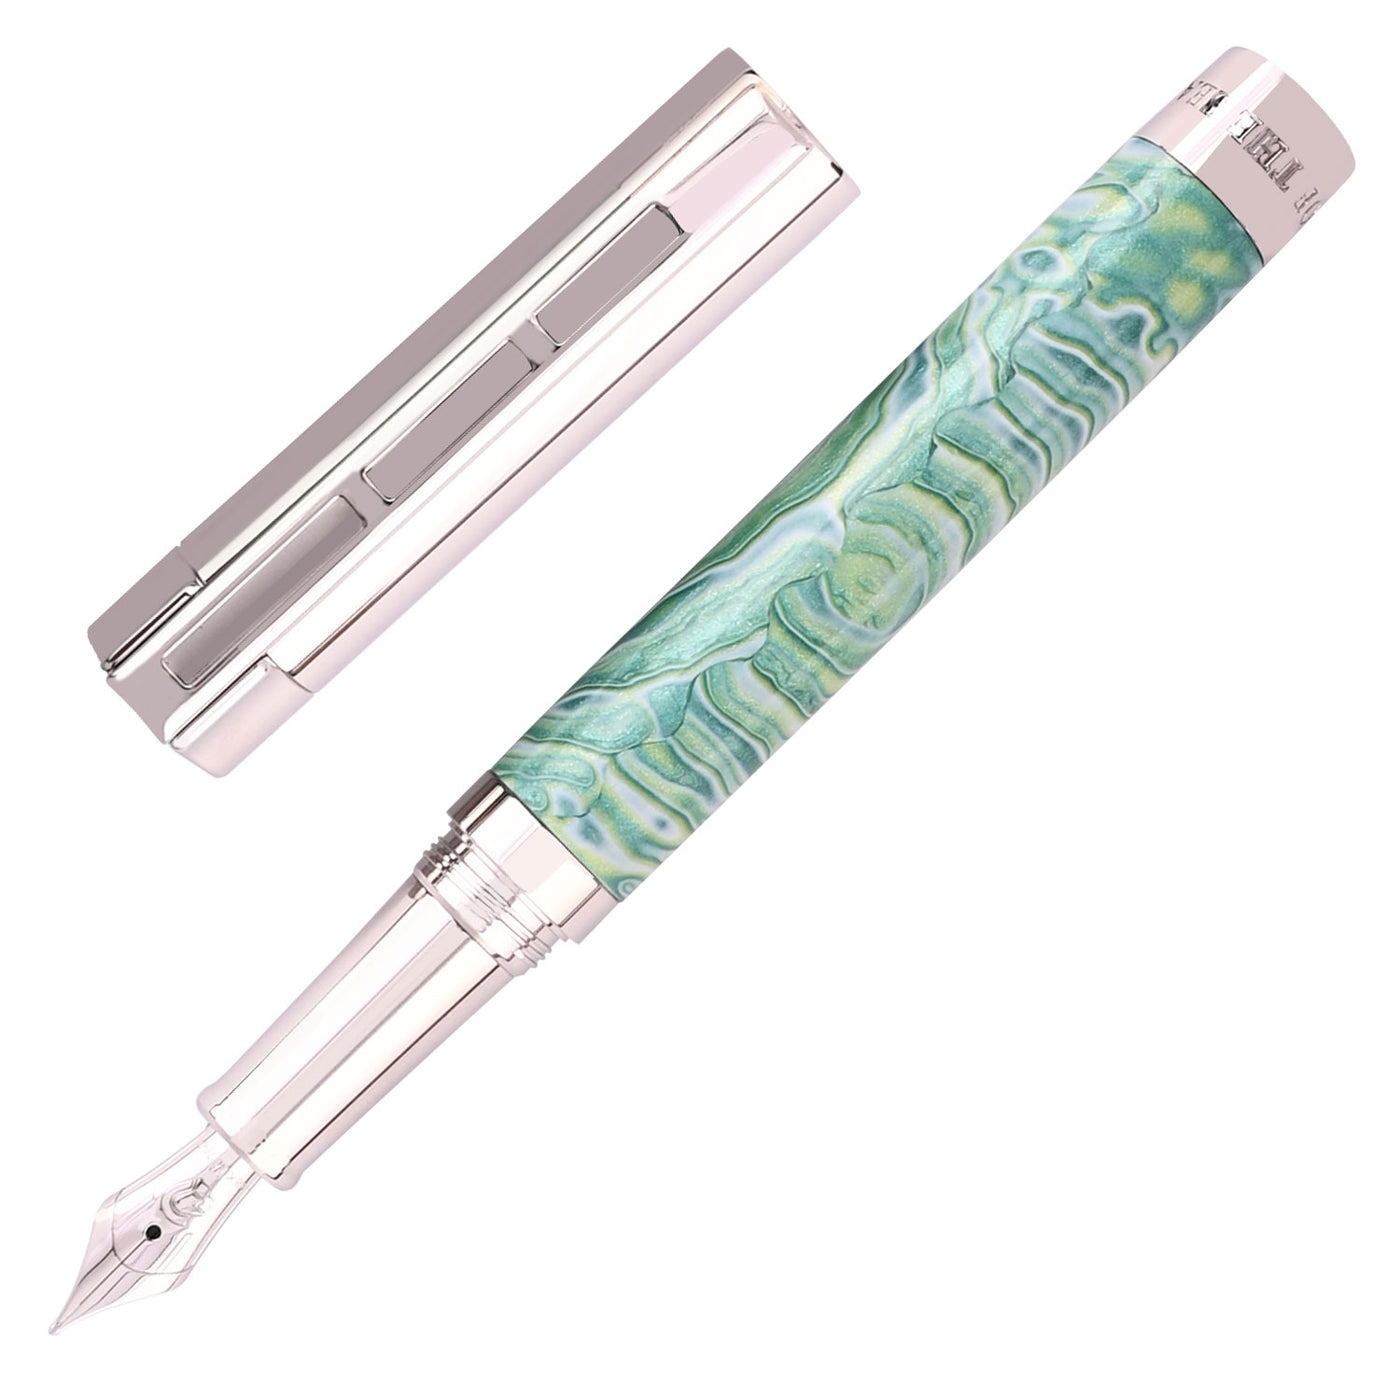 Staedtler Premium Pen of the Season Fountain Pen - Green CT (Limited Edition) 1